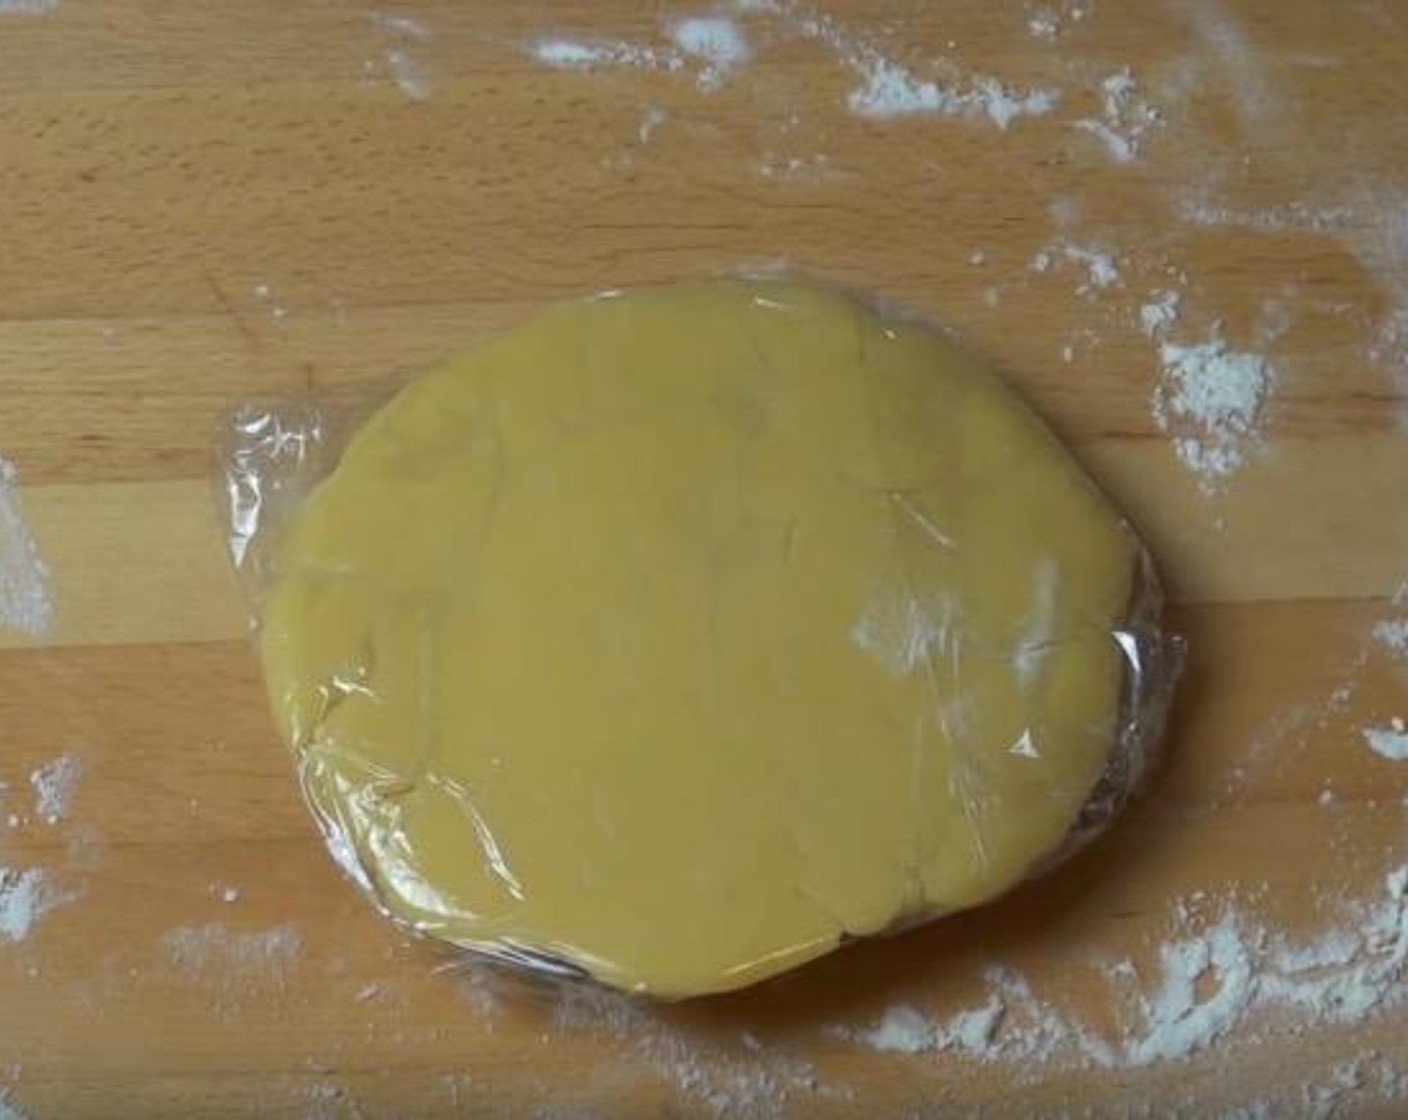 step 3 Transfer the dough to a lightly floured surface. Knead until smooth and slightly elastic. Shape dough into a disk and cover in plastic wrap. Place in refrigerator for 30 minutes to chill.